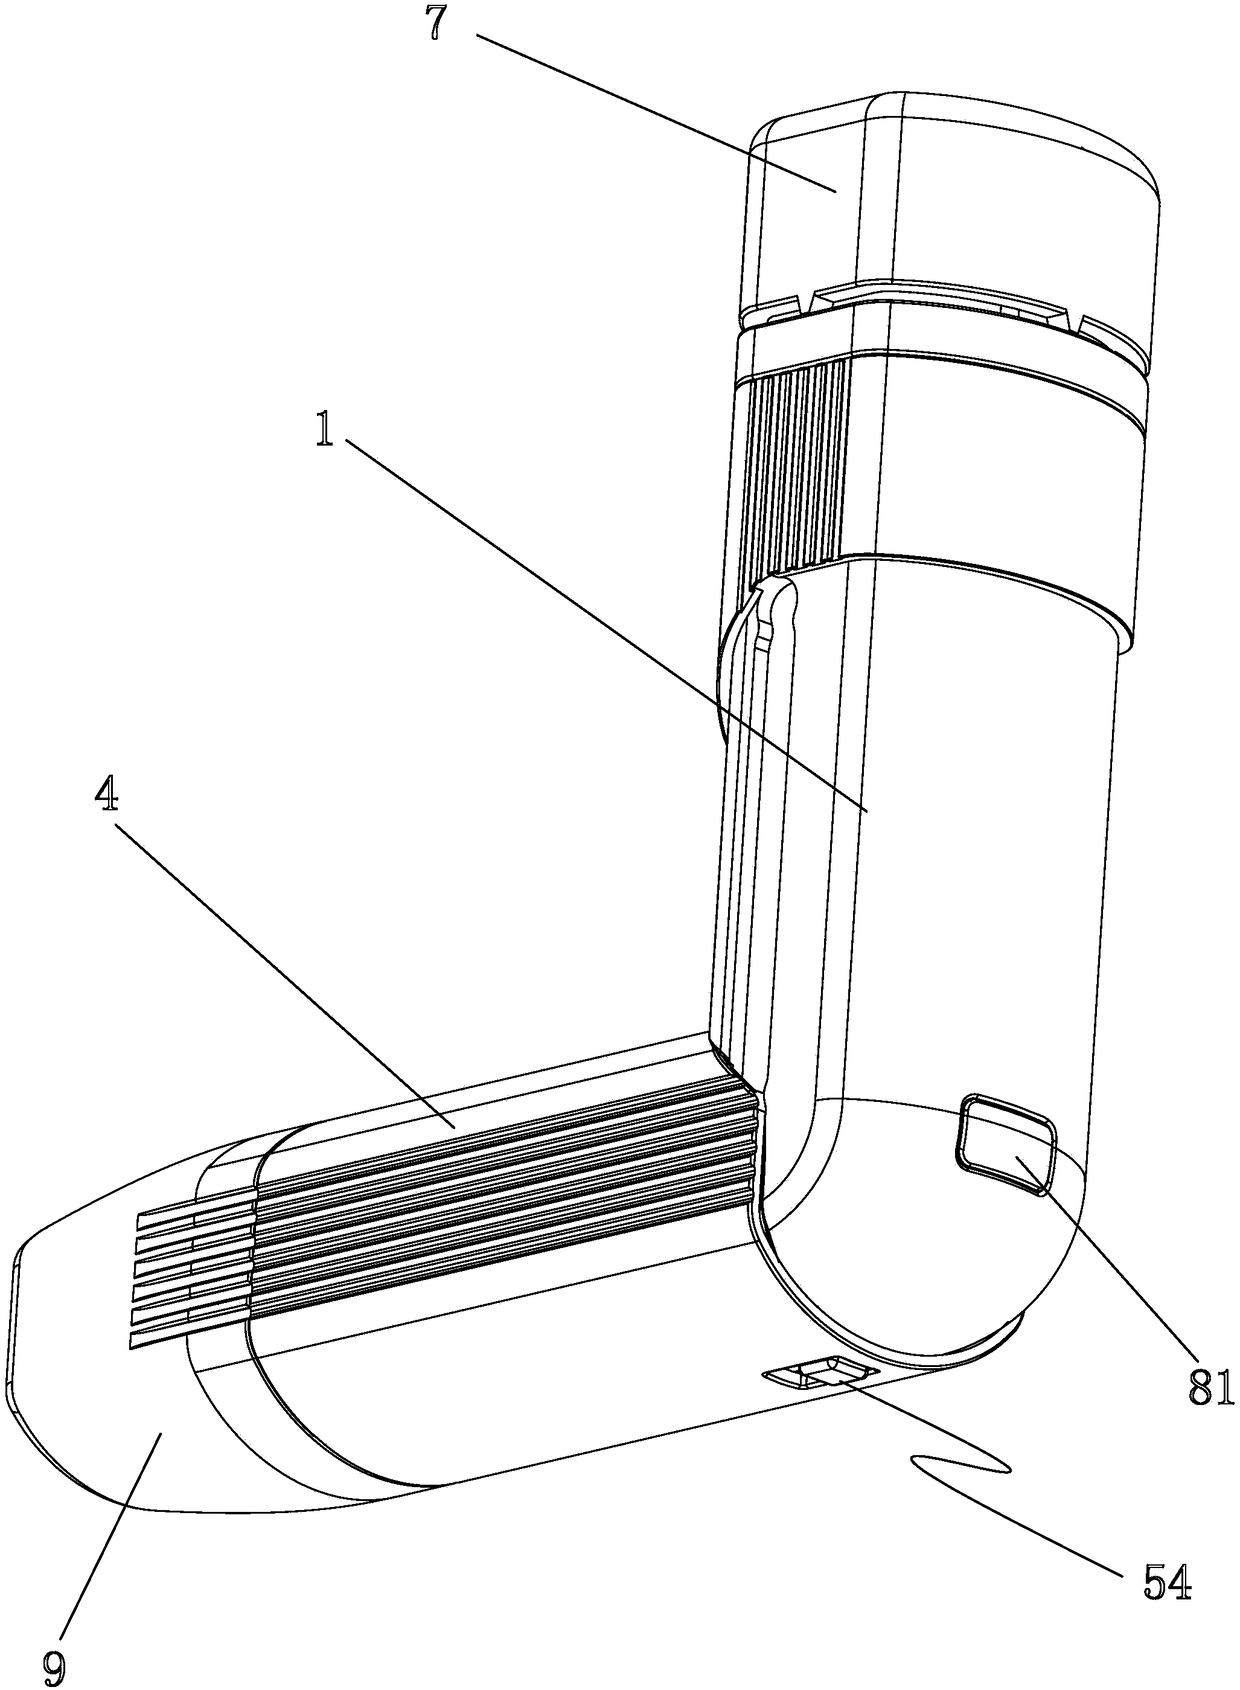 A counter-spray assembly with a buffer cover and a countable dosing actuator device